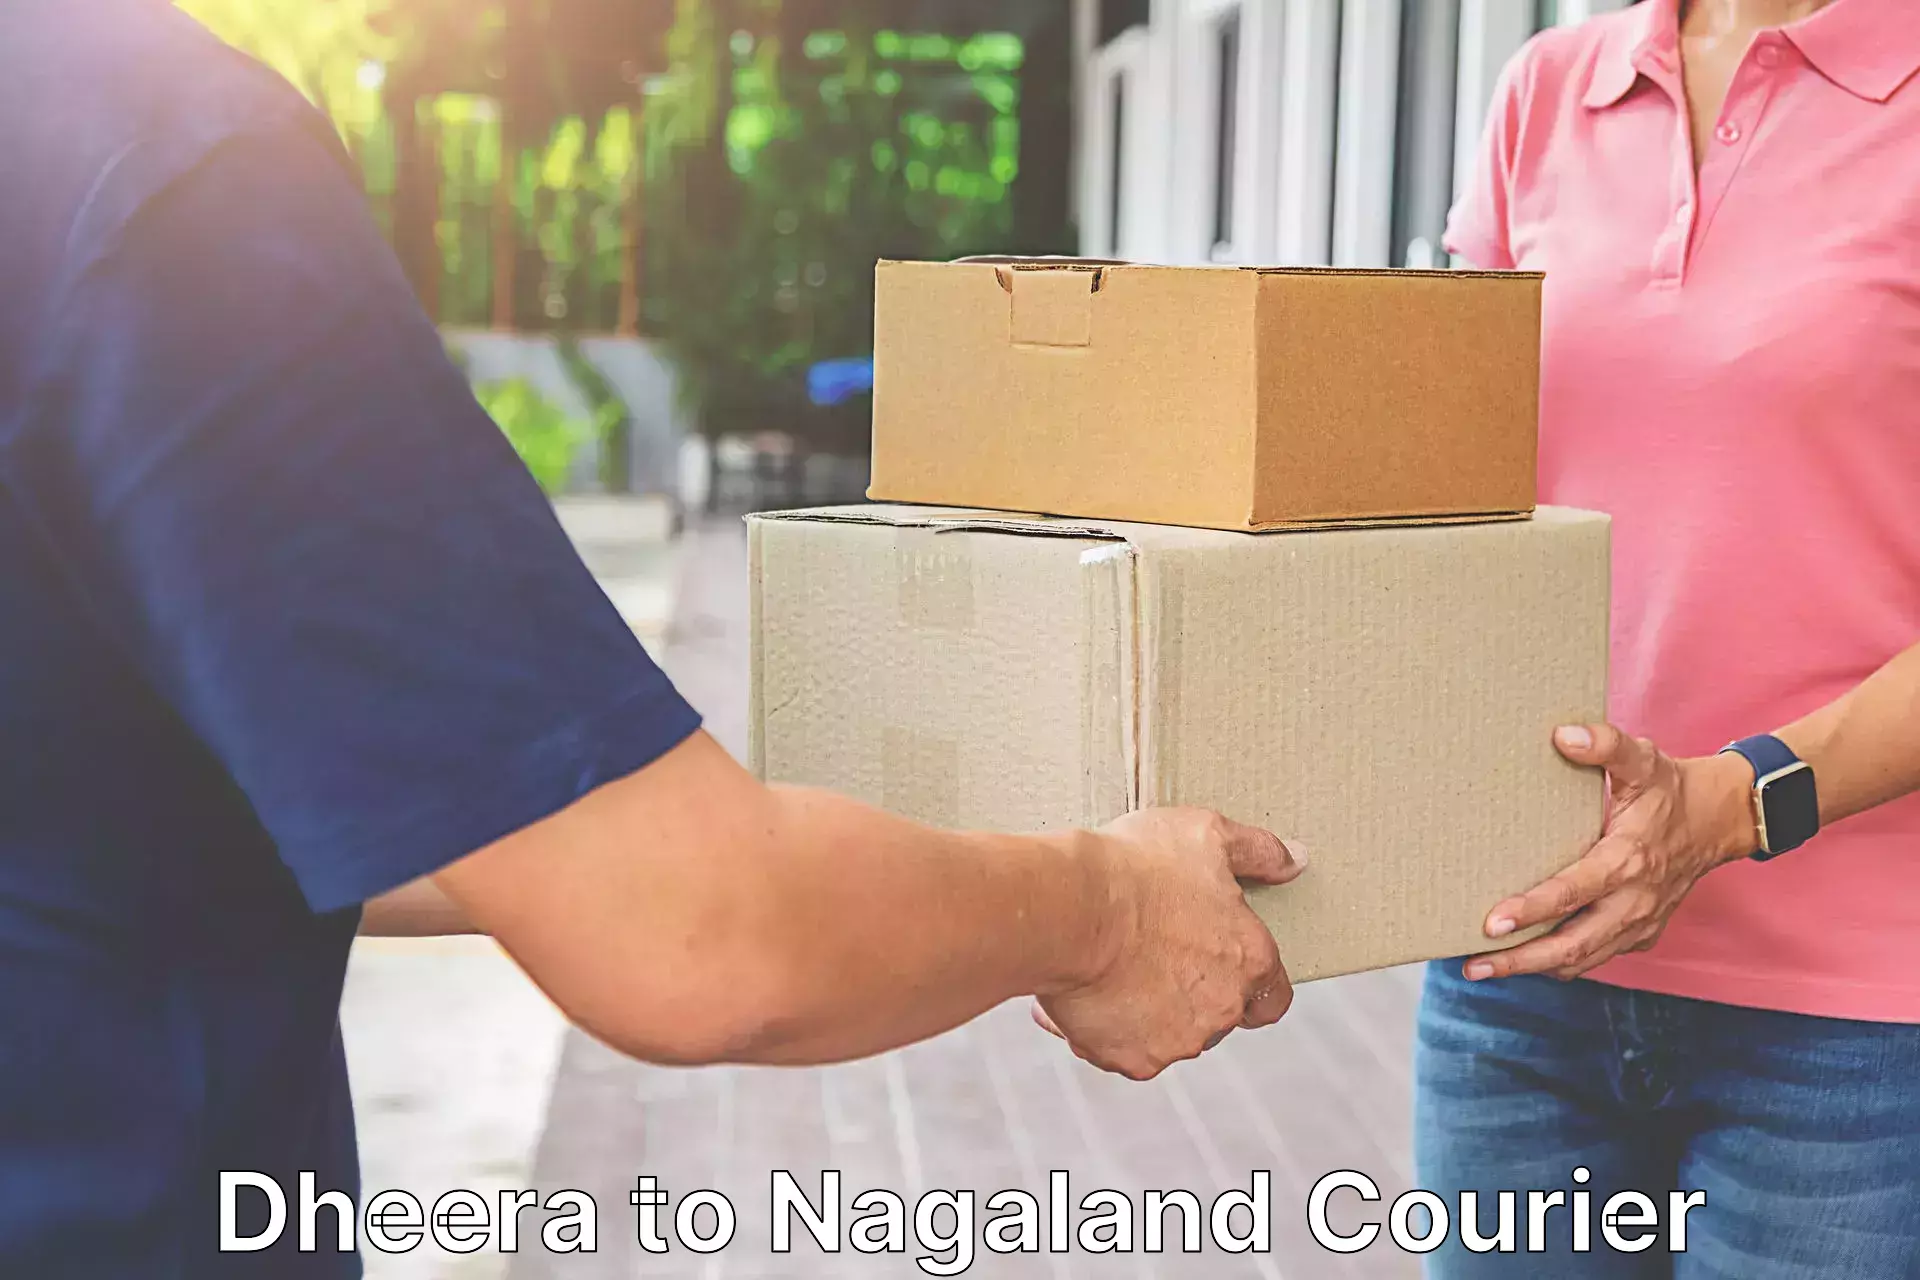 Courier service efficiency Dheera to Nagaland